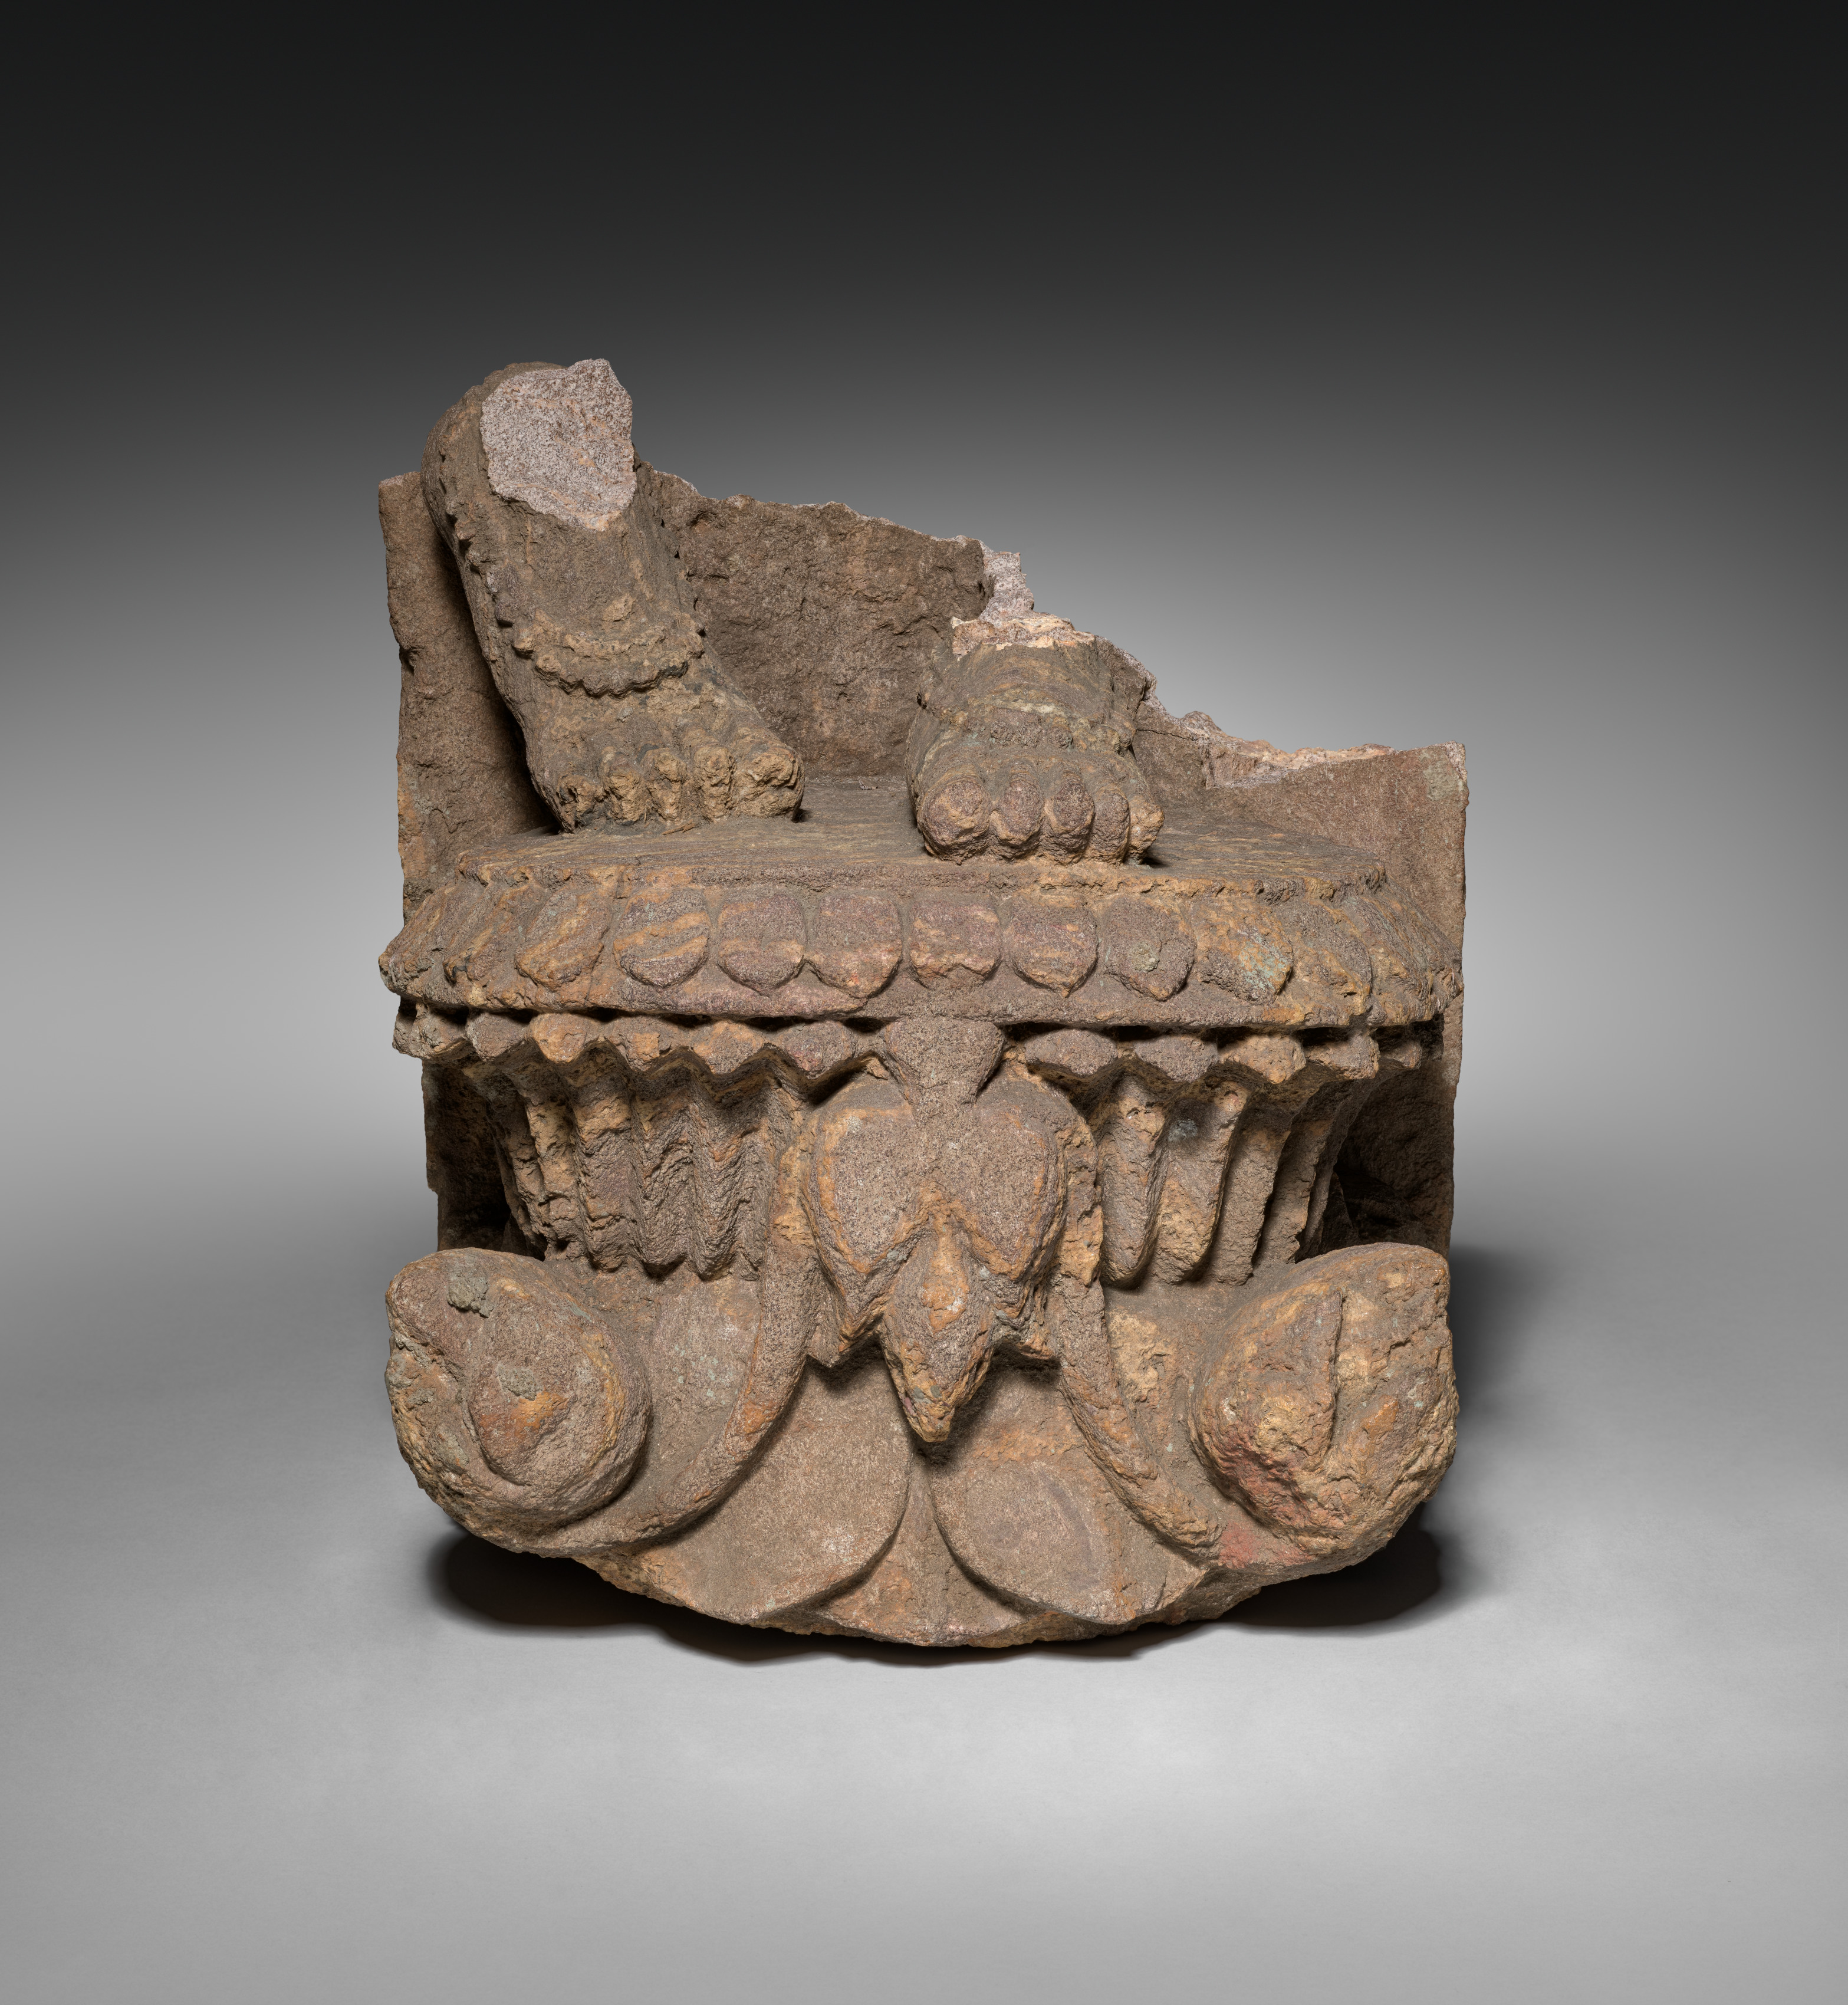 Base and Feet of Devata or Yakshi